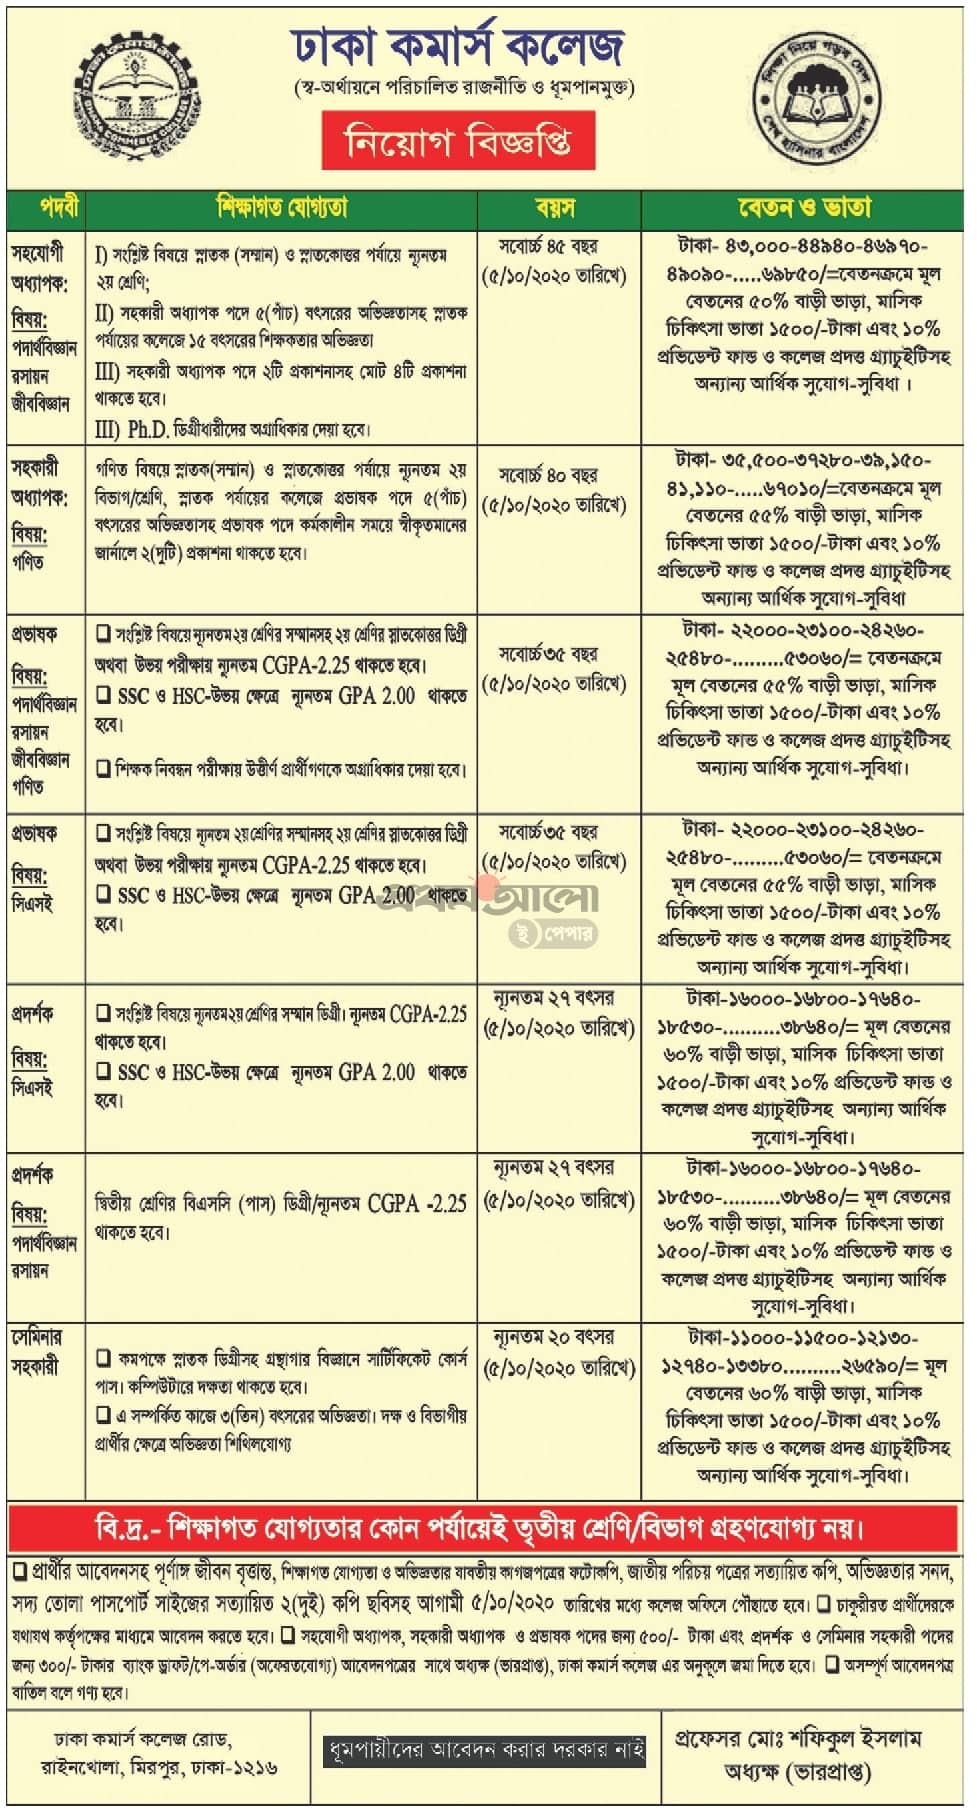 College job in Dhaka Commerce College (DCC)